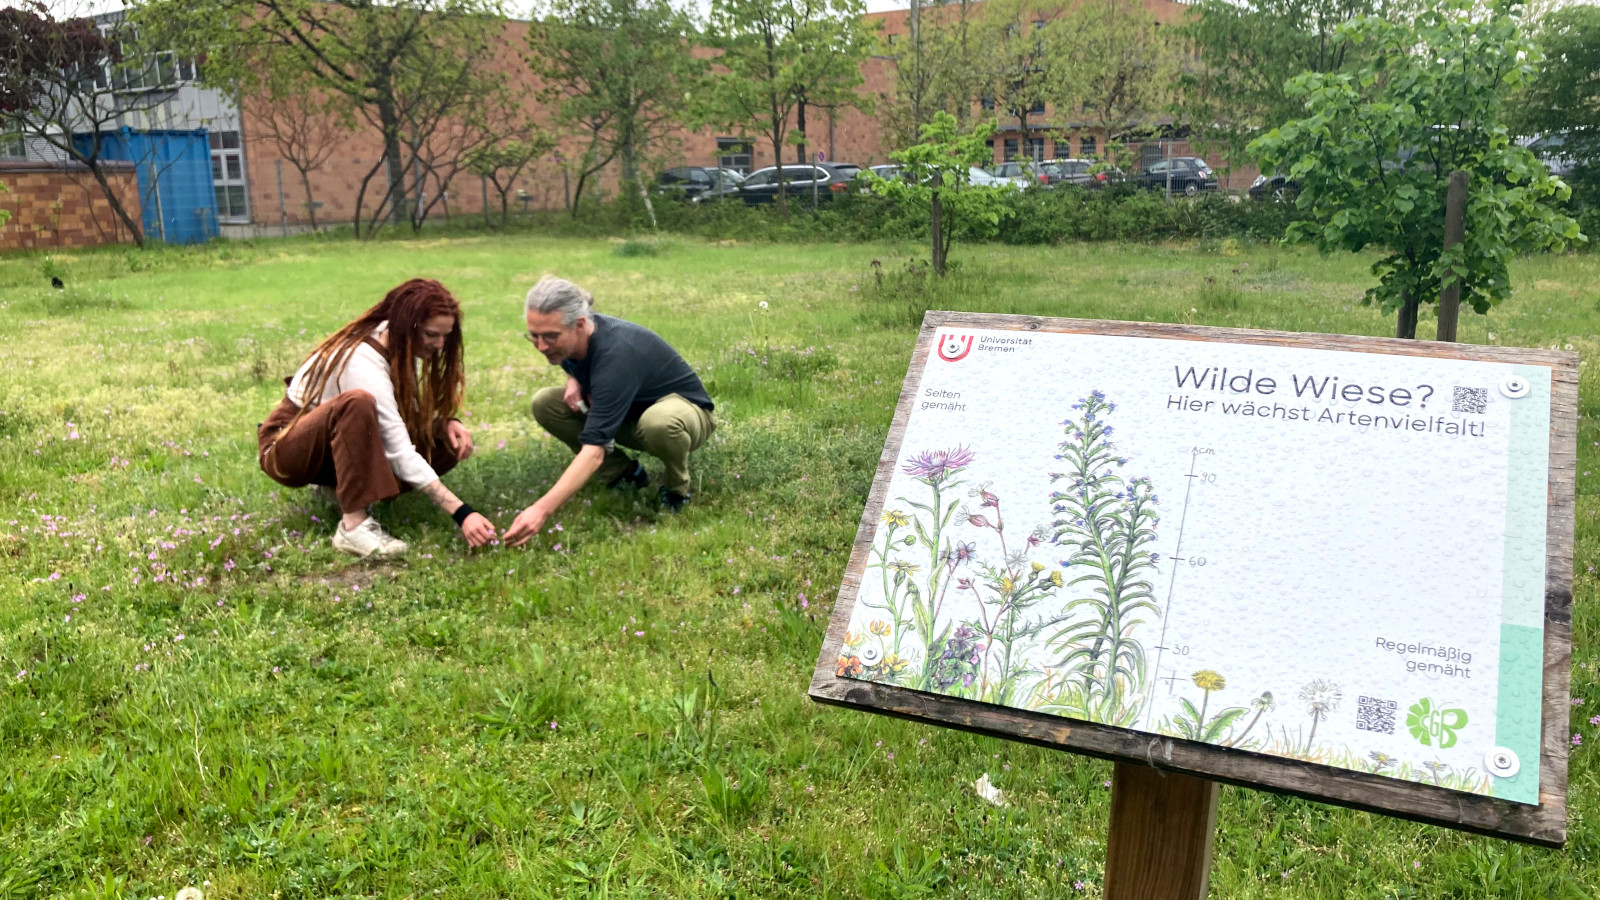 Marko Rohlfs and Lorena Kalvelage crouch in a meadow and look at the plants on the ground. In the foreground is a sign with information about the biodiversity project on campus.